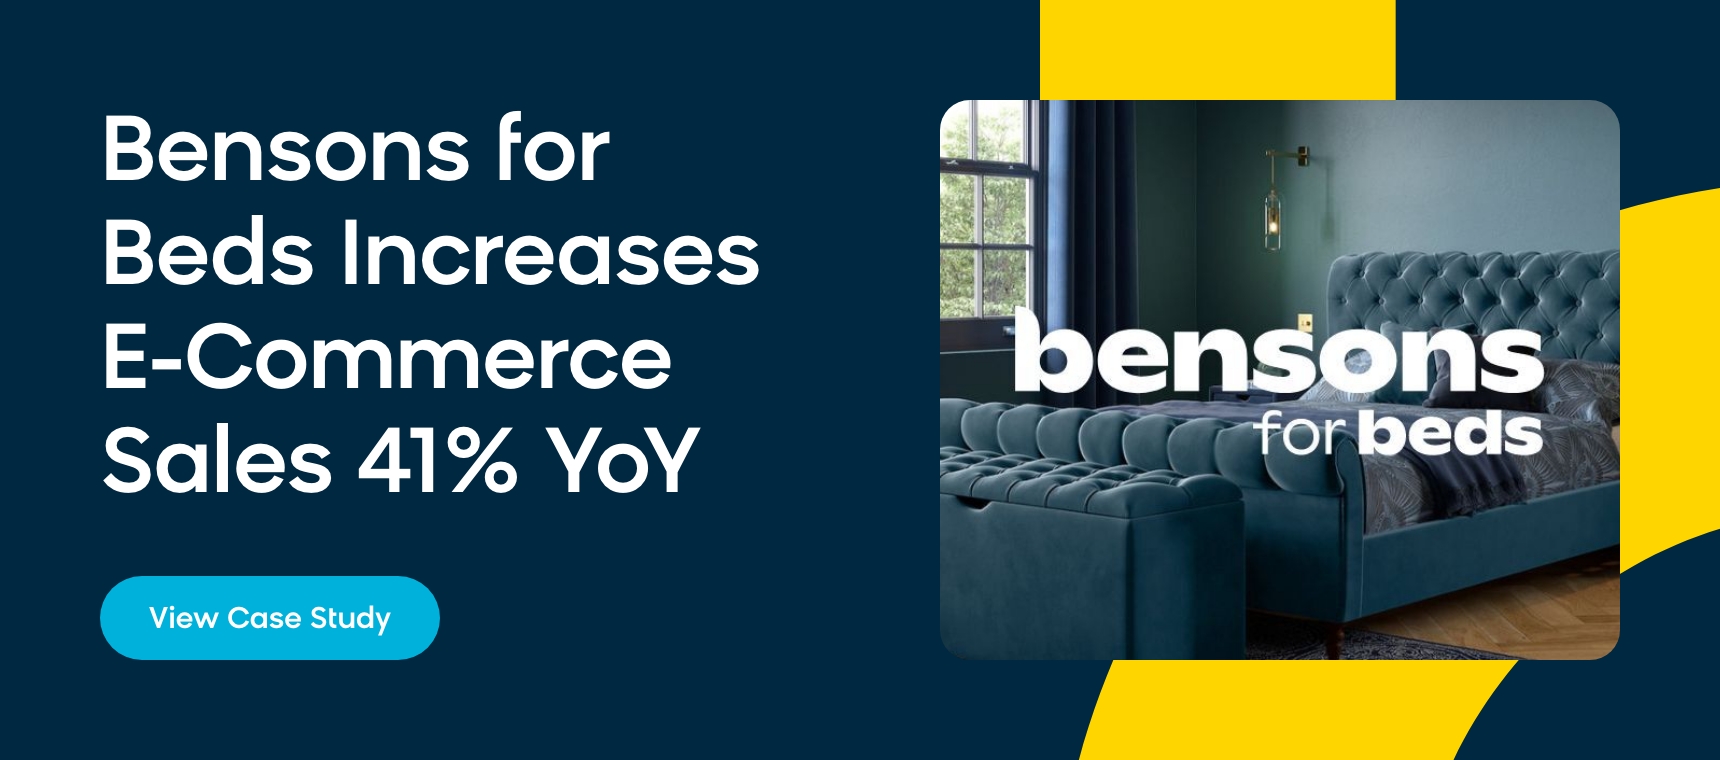 Bensons for Beds case study with Bloomreach